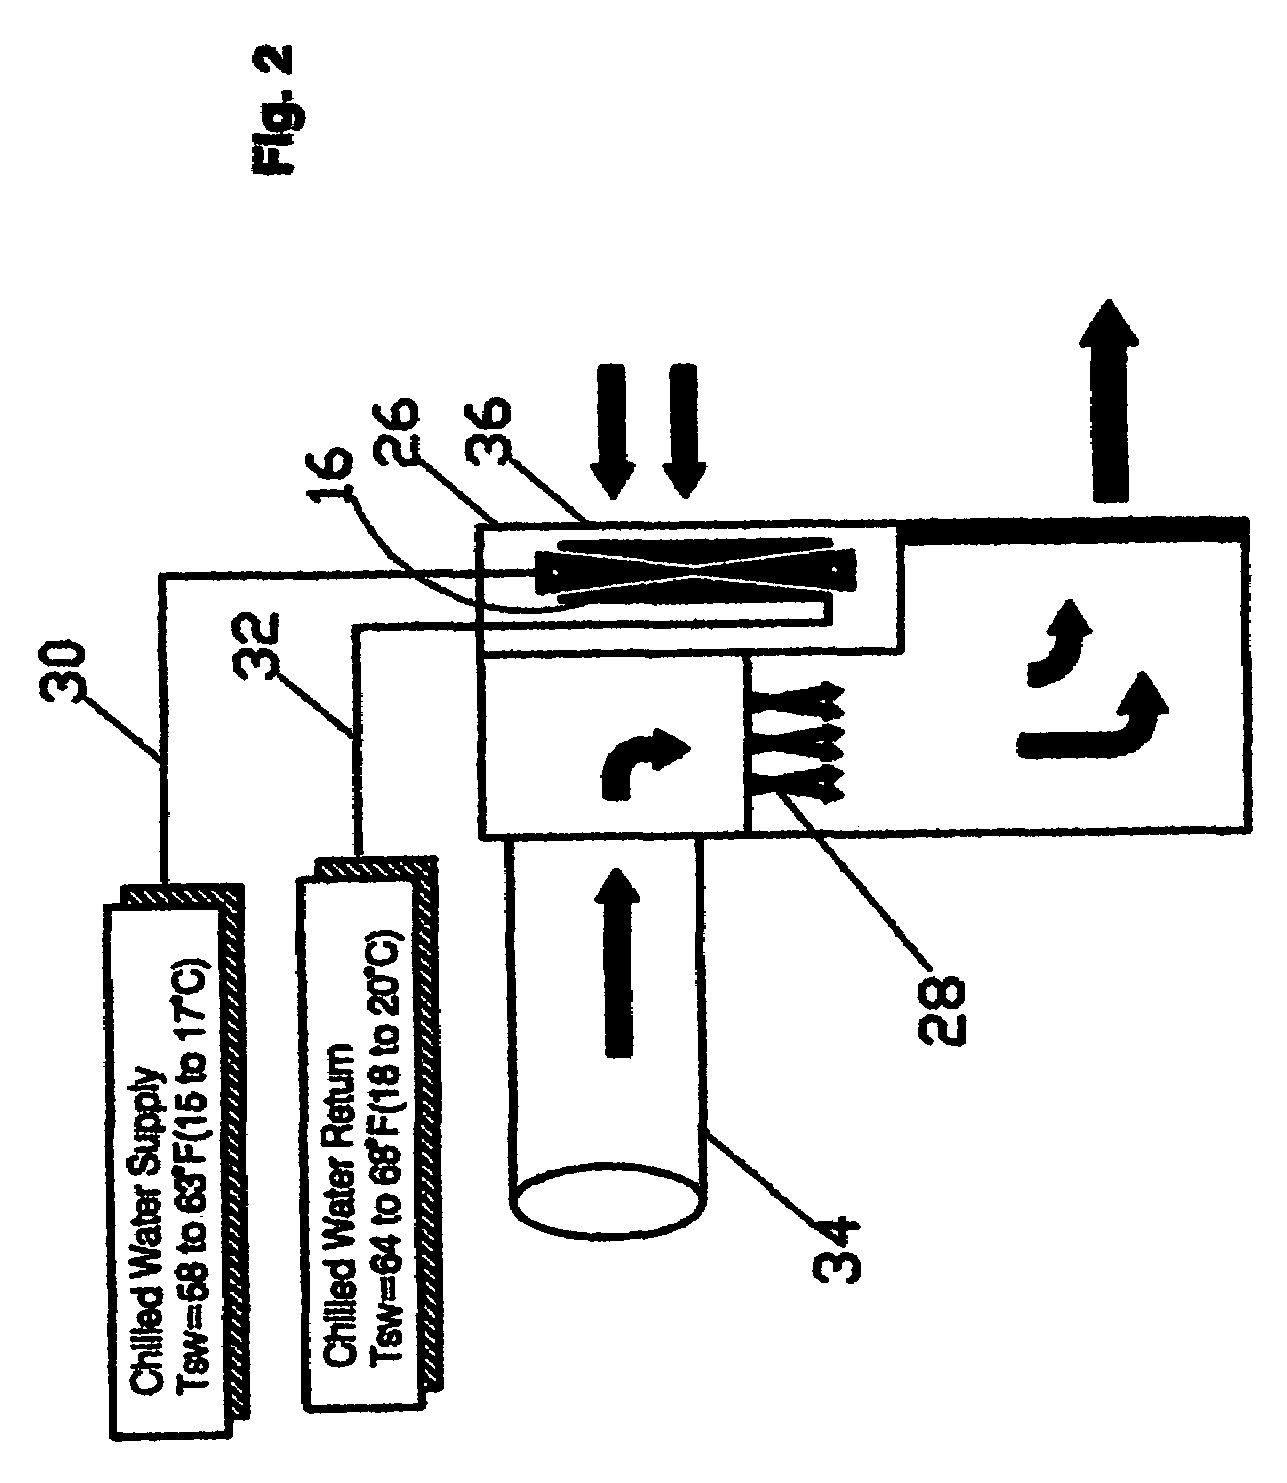 Low noise level HVAC system having displacement with induction